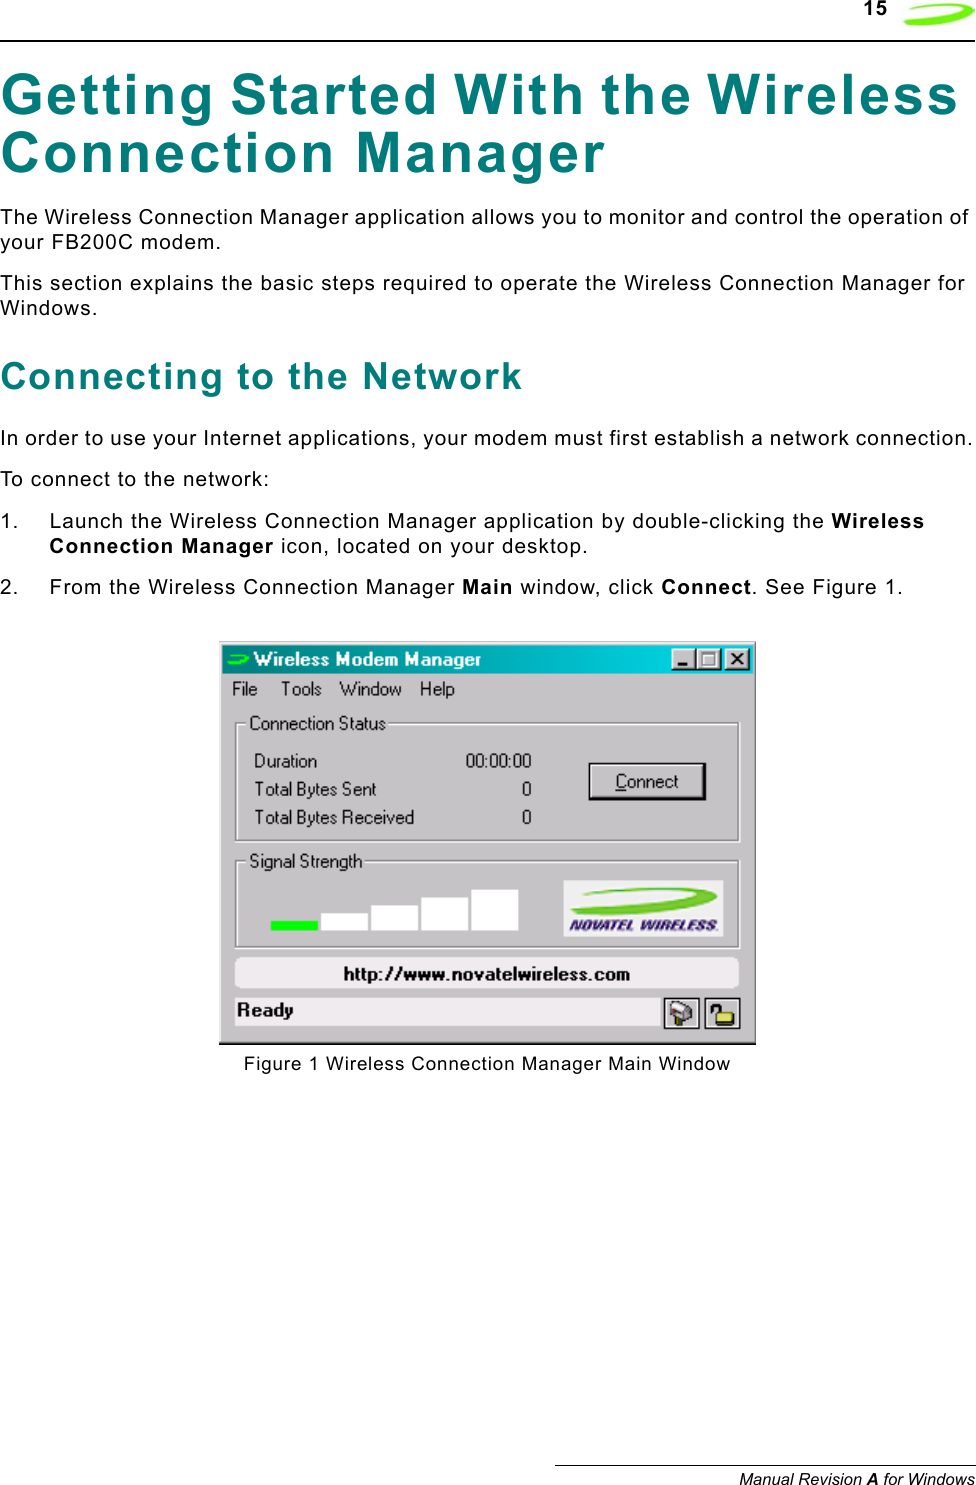    15Manual Revision A for WindowsGetting Started With the Wireless Connection ManagerThe Wireless Connection Manager application allows you to monitor and control the operation of your FB200C modem. This section explains the basic steps required to operate the Wireless Connection Manager for Windows.Connecting to the NetworkIn order to use your Internet applications, your modem must first establish a network connection.To connect to the network:1. Launch the Wireless Connection Manager application by double-clicking the Wireless Connection Manager icon, located on your desktop.2. From the Wireless Connection Manager Main window, click Connect. See Figure 1.Figure 1 Wireless Connection Manager Main Window